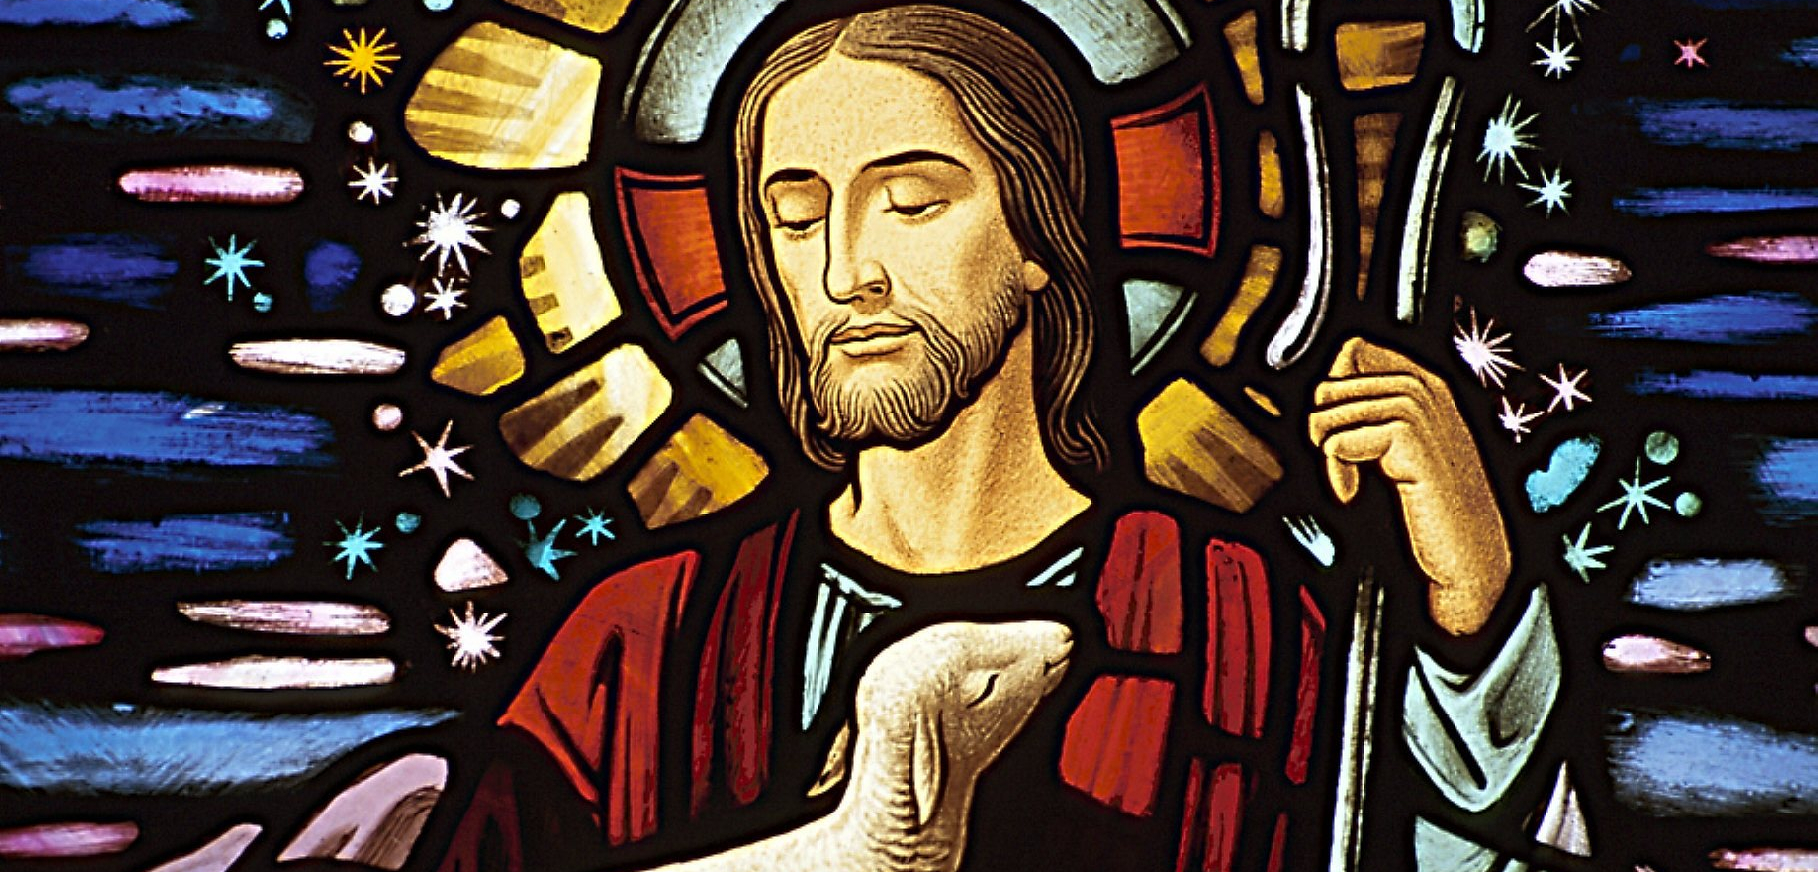 stained-glass-window-depiction-of-jesus.jpg